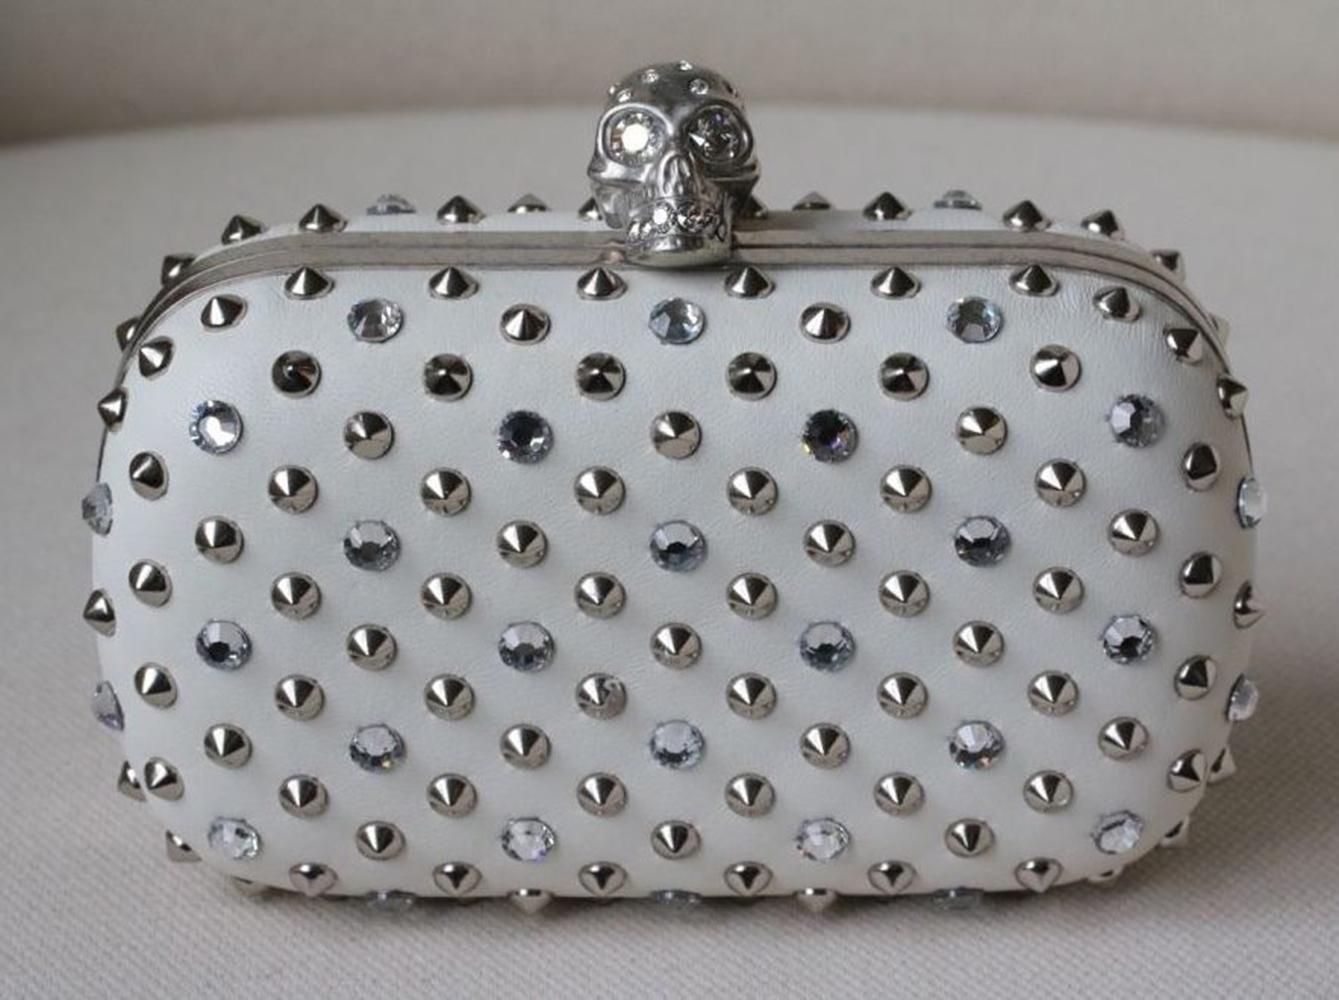 Alexander McQueen napa leather clutch with silvertone studs and crystals. Signature hinged crystal-embellished skull clasp. Framed hard-shell design with rounded corners. Made in Italy.

Dimensions: Approx. 14 x 9 x 5 cm 

Condition: As new